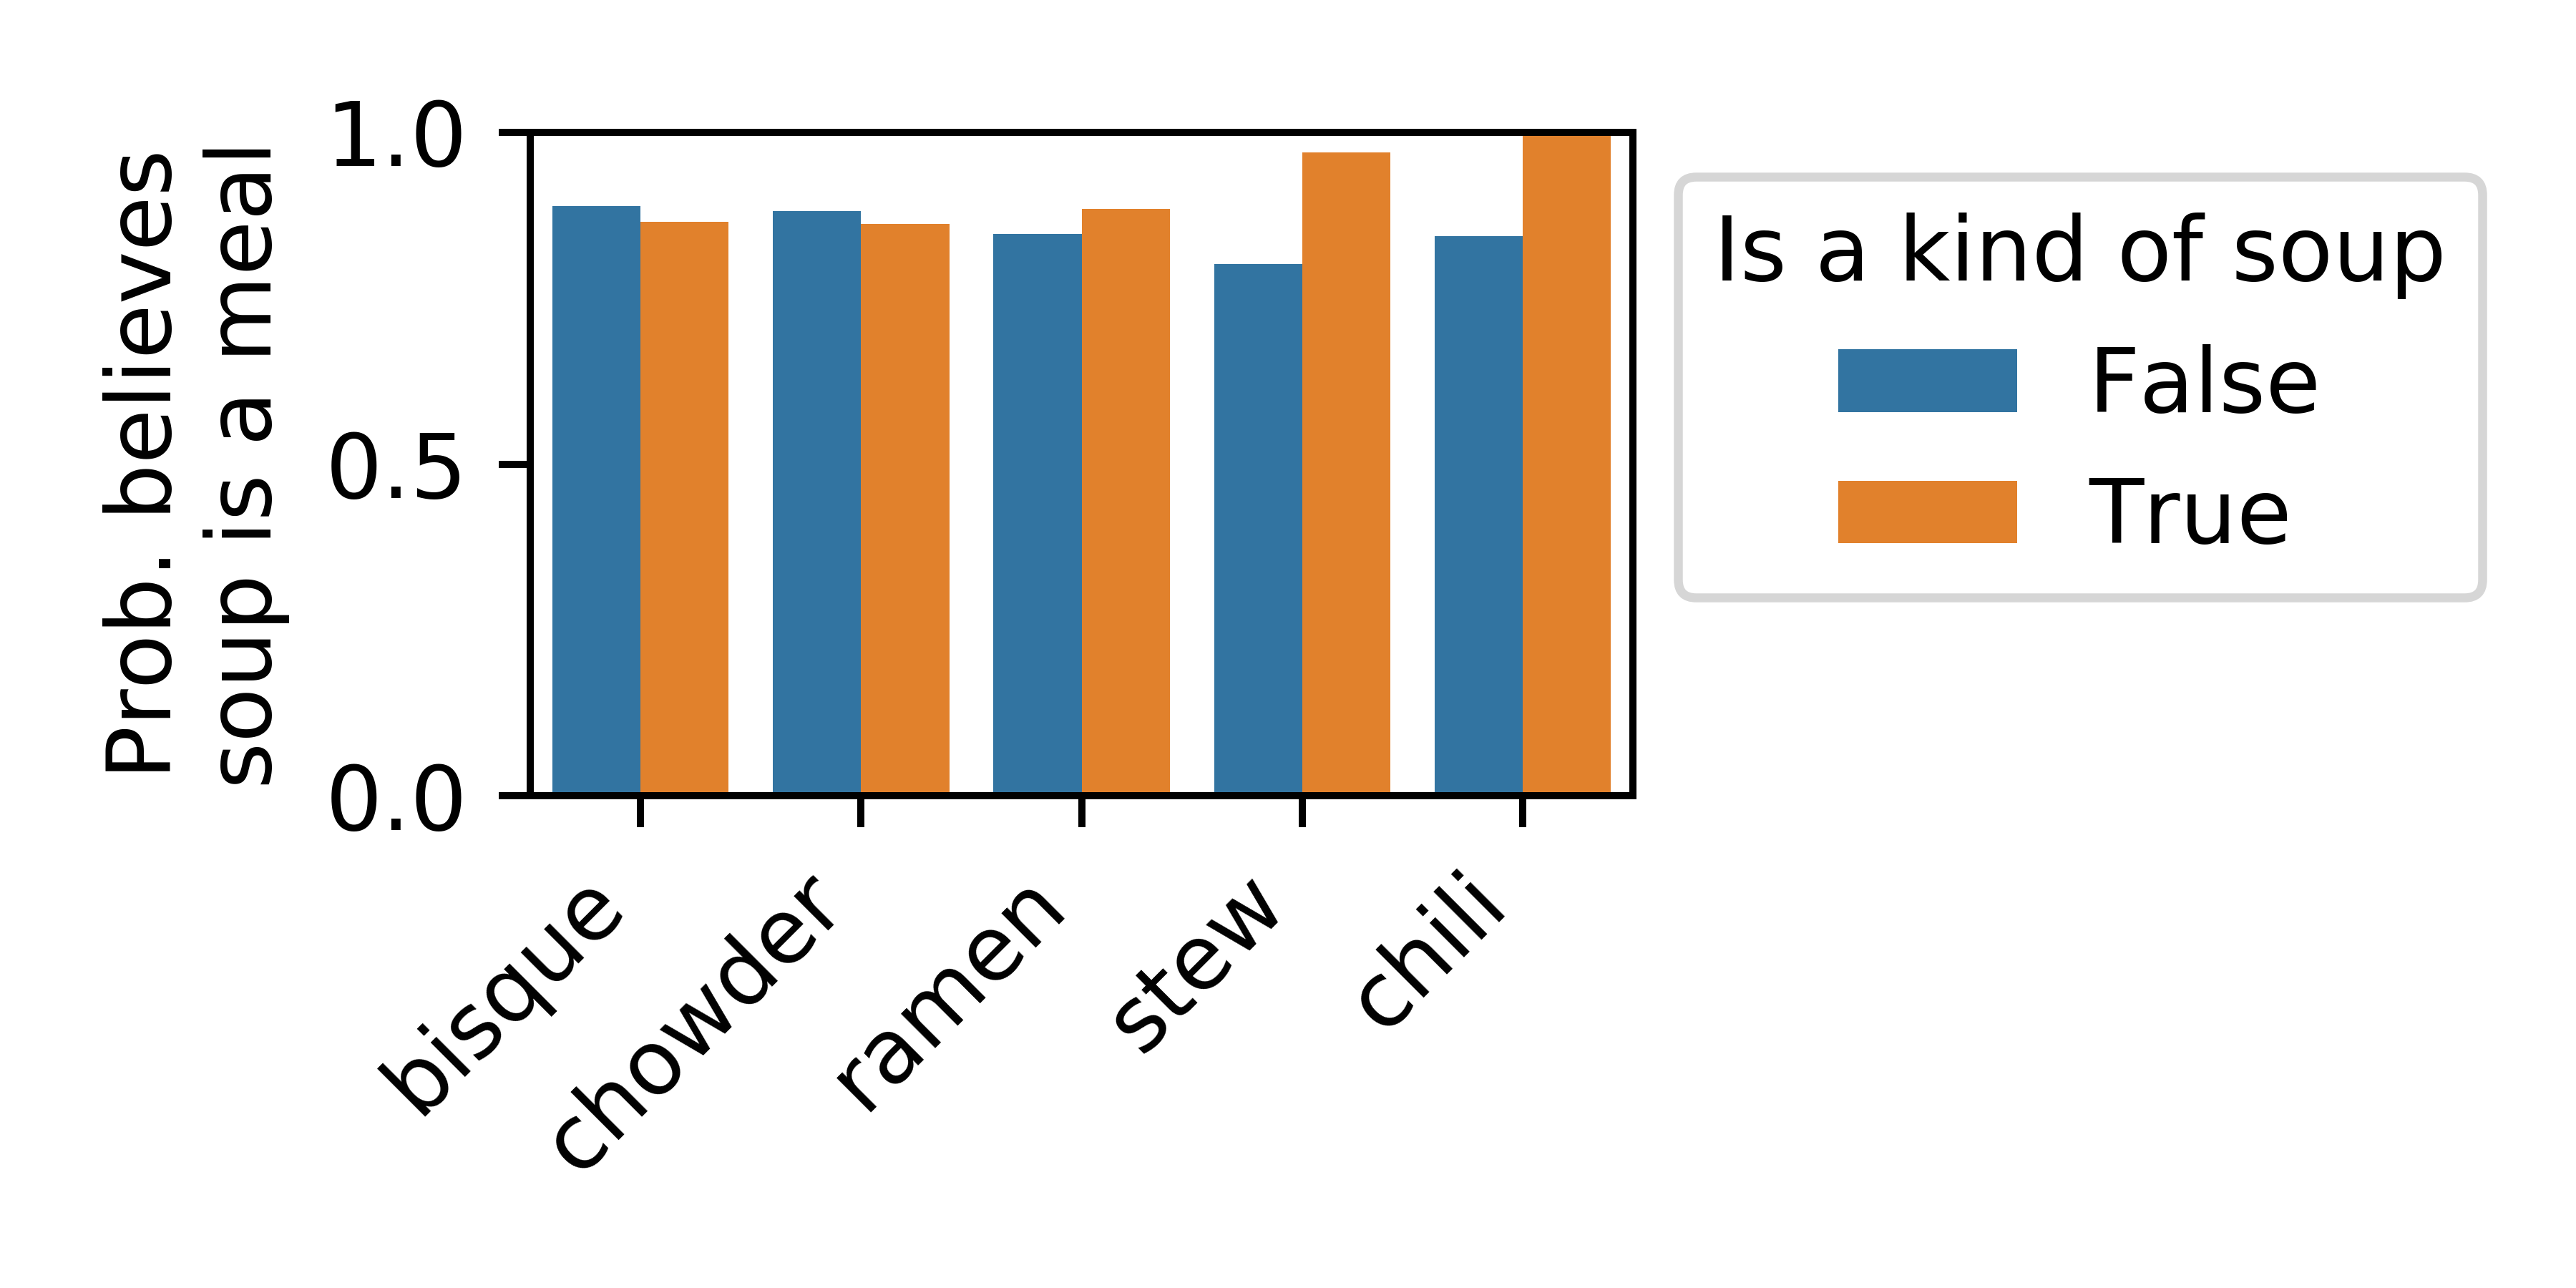 Bar chart showing that people who believe that stews
and chilis are soups are more likely to believe that soup can be a meal on its
own.